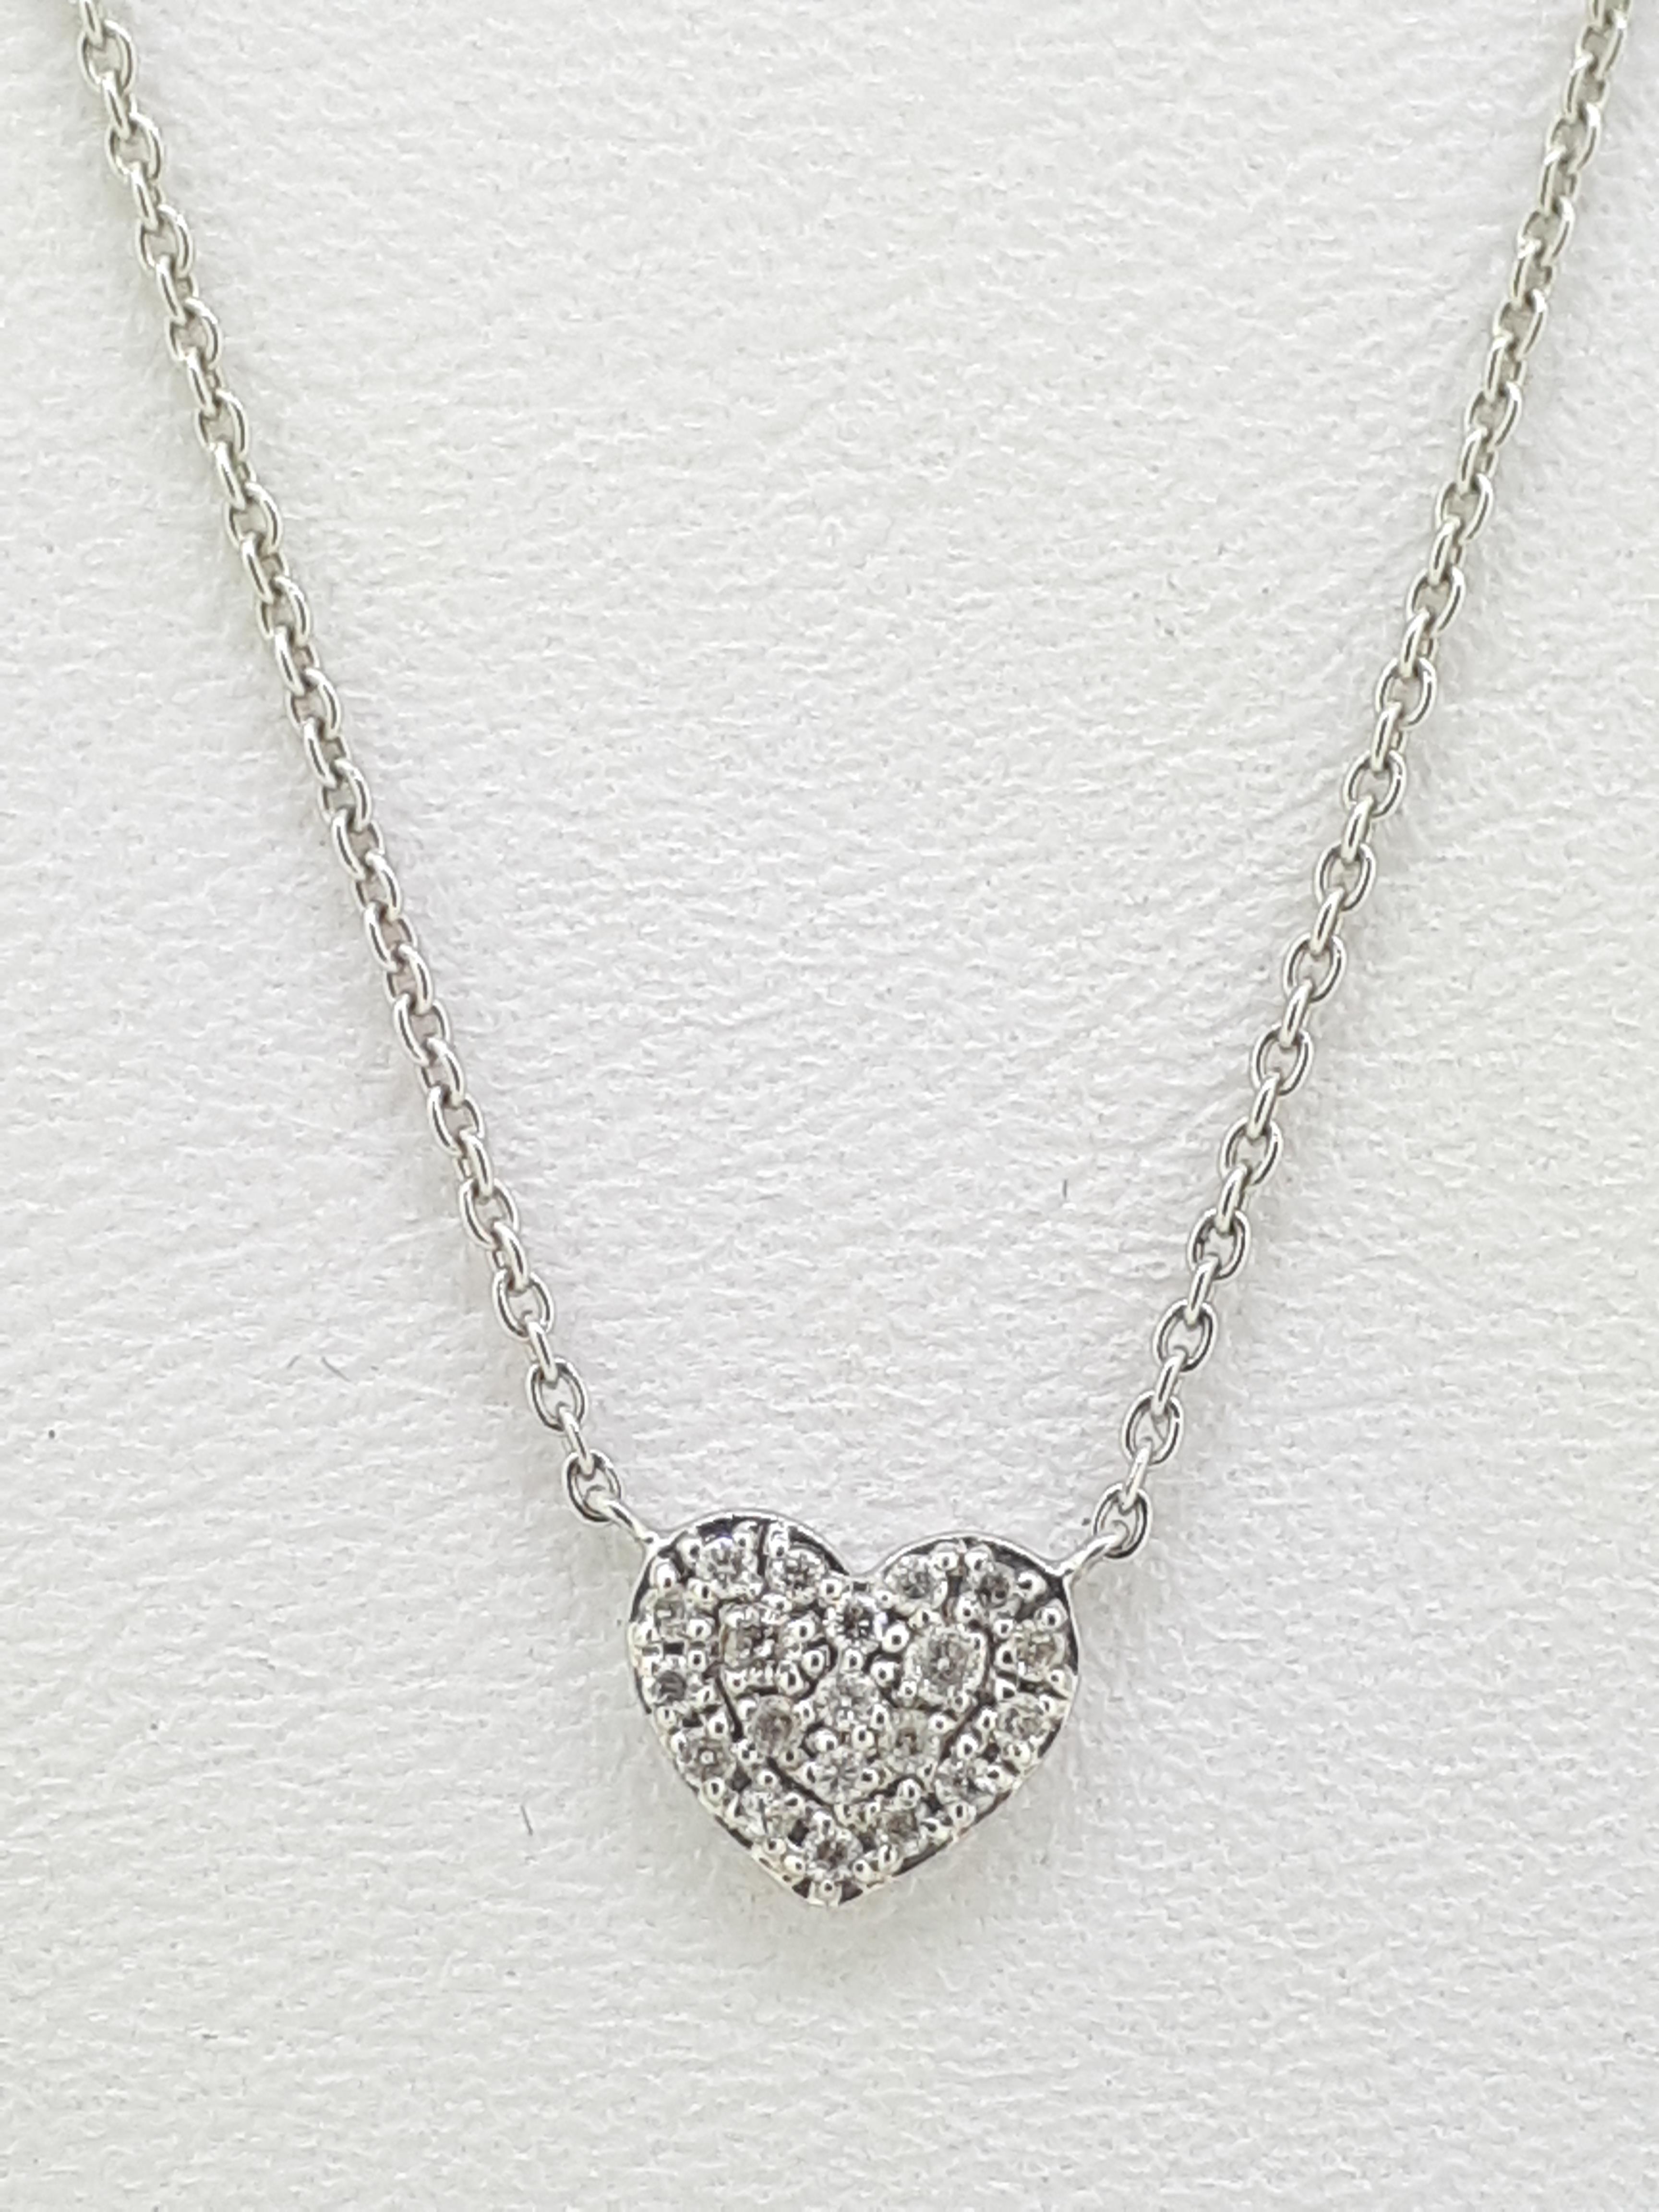 9ct White Gold 0.07ct Diamond Heart Pendant Necklace - Image 2 of 5